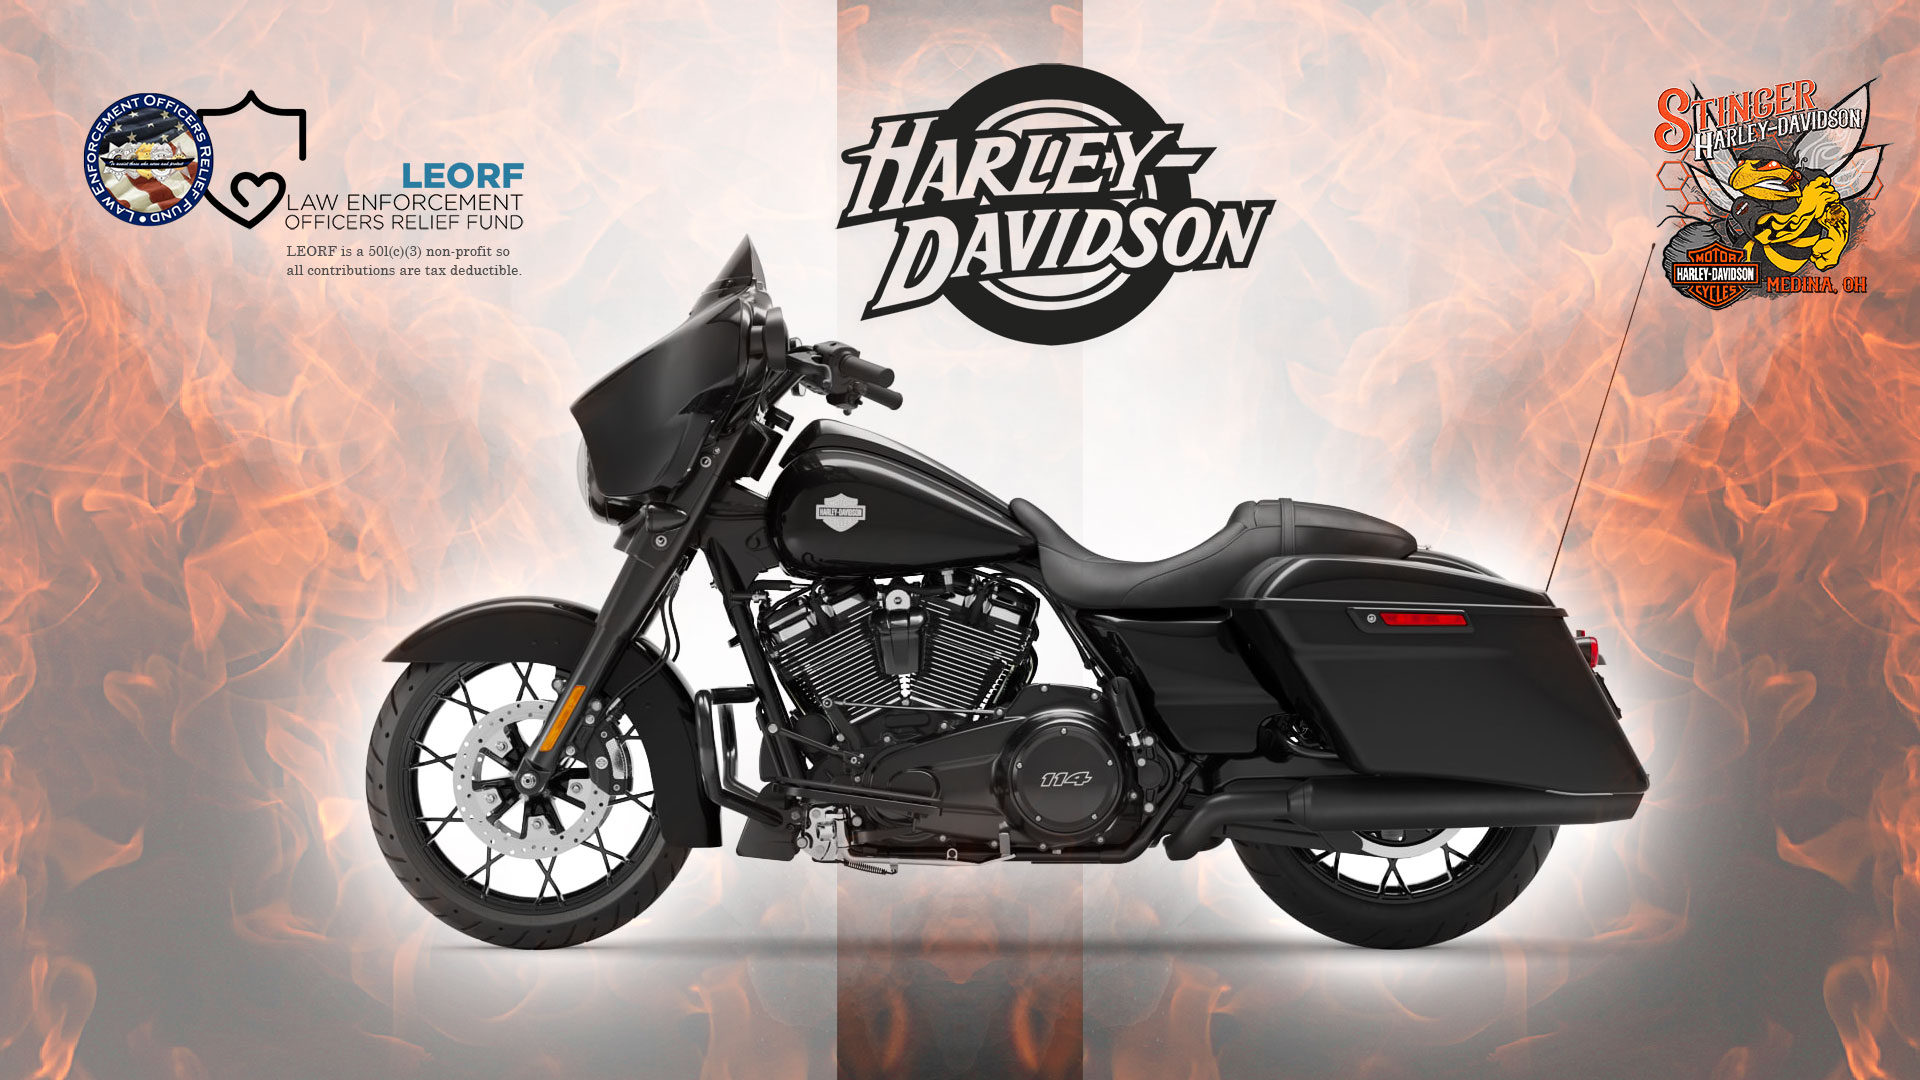 Get a Harley Ticket to Help LEOs Before December 7!